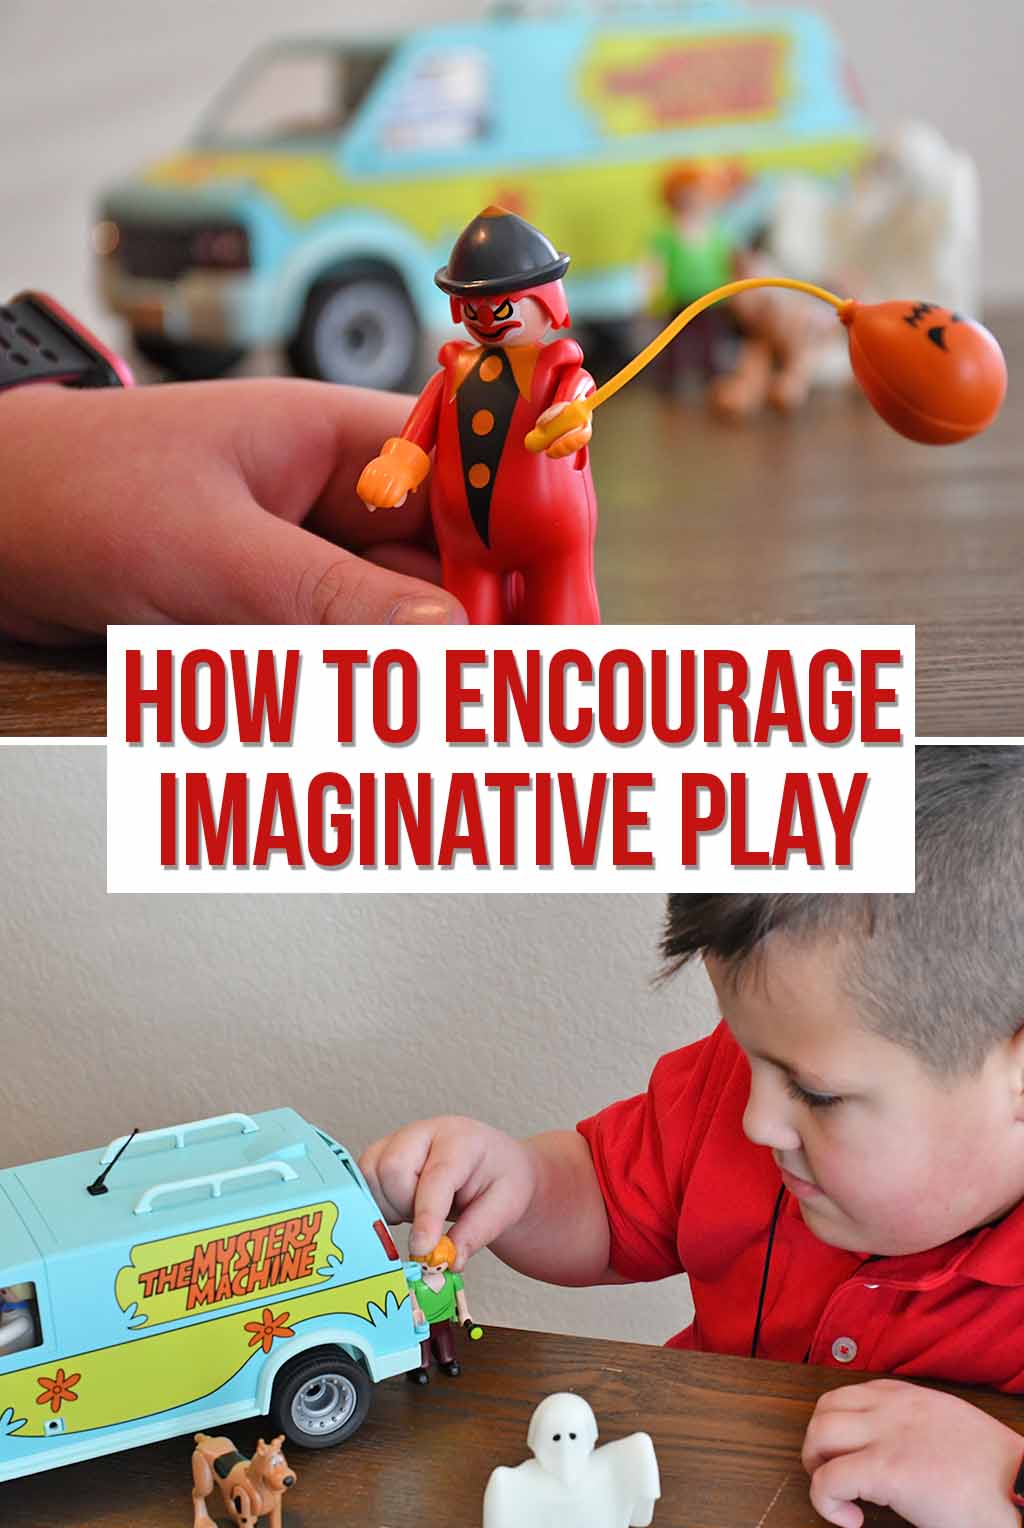 How to Encourage Imaginative Play